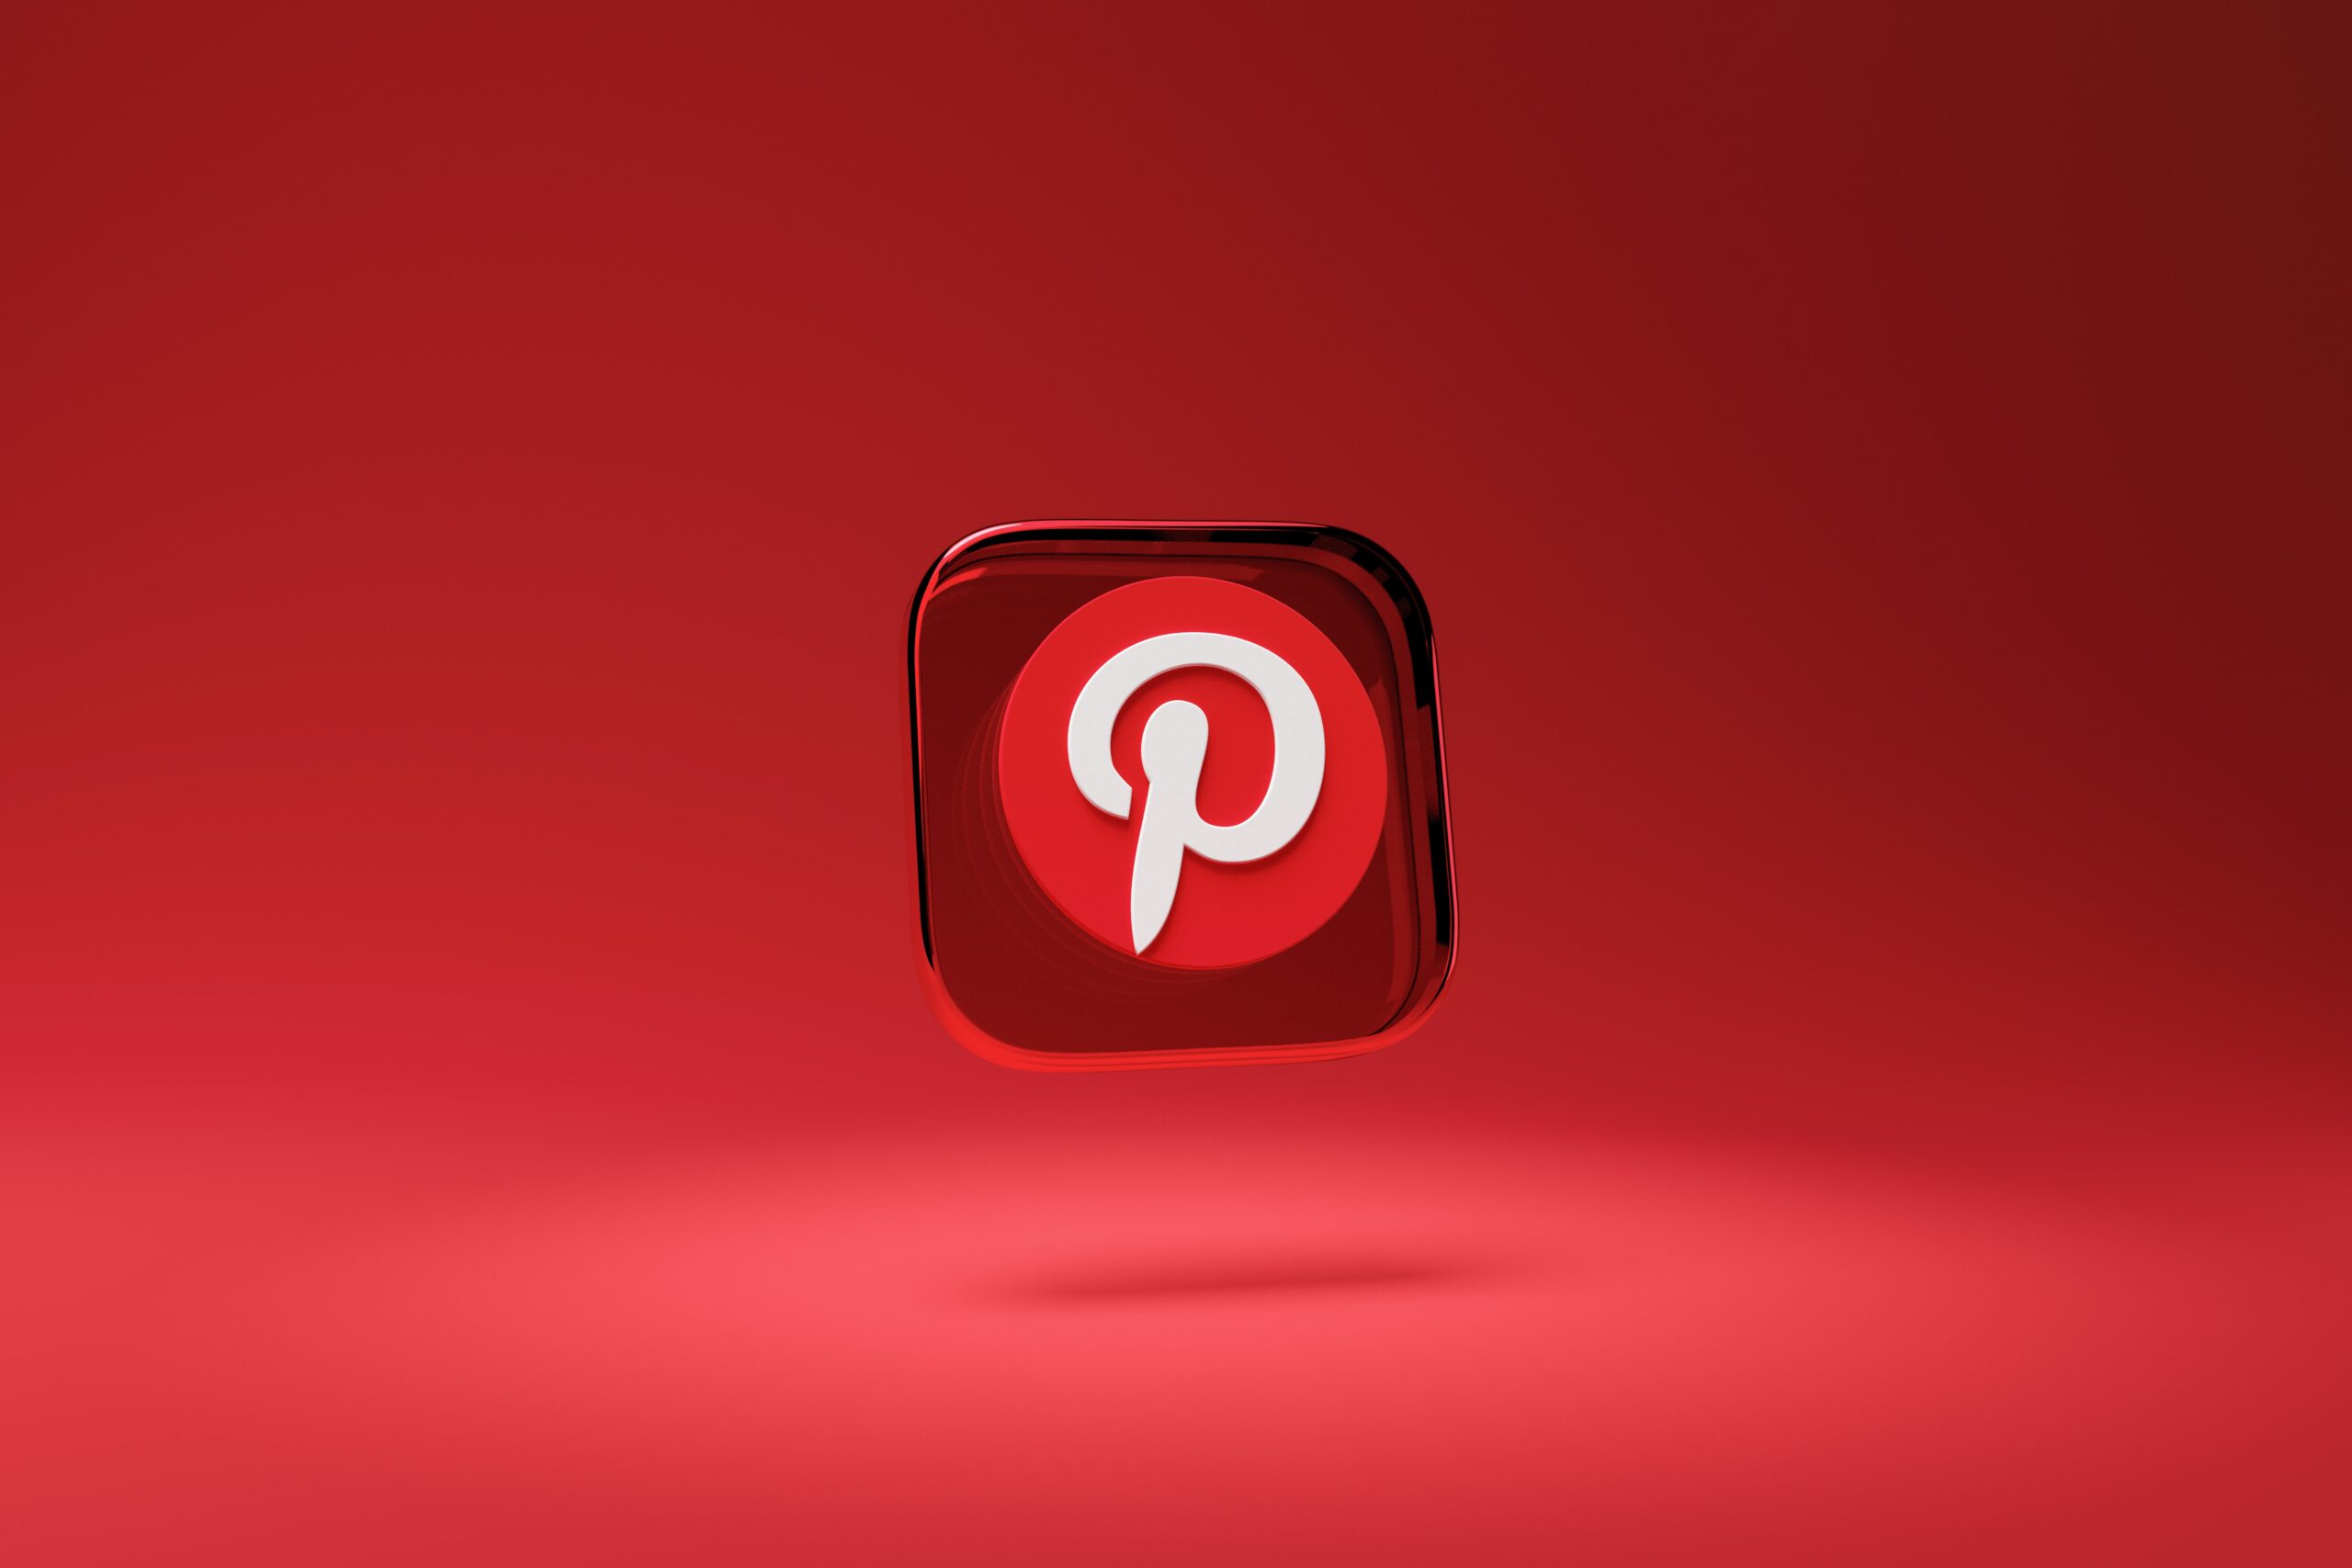 The Pinterest icon floating in a red background